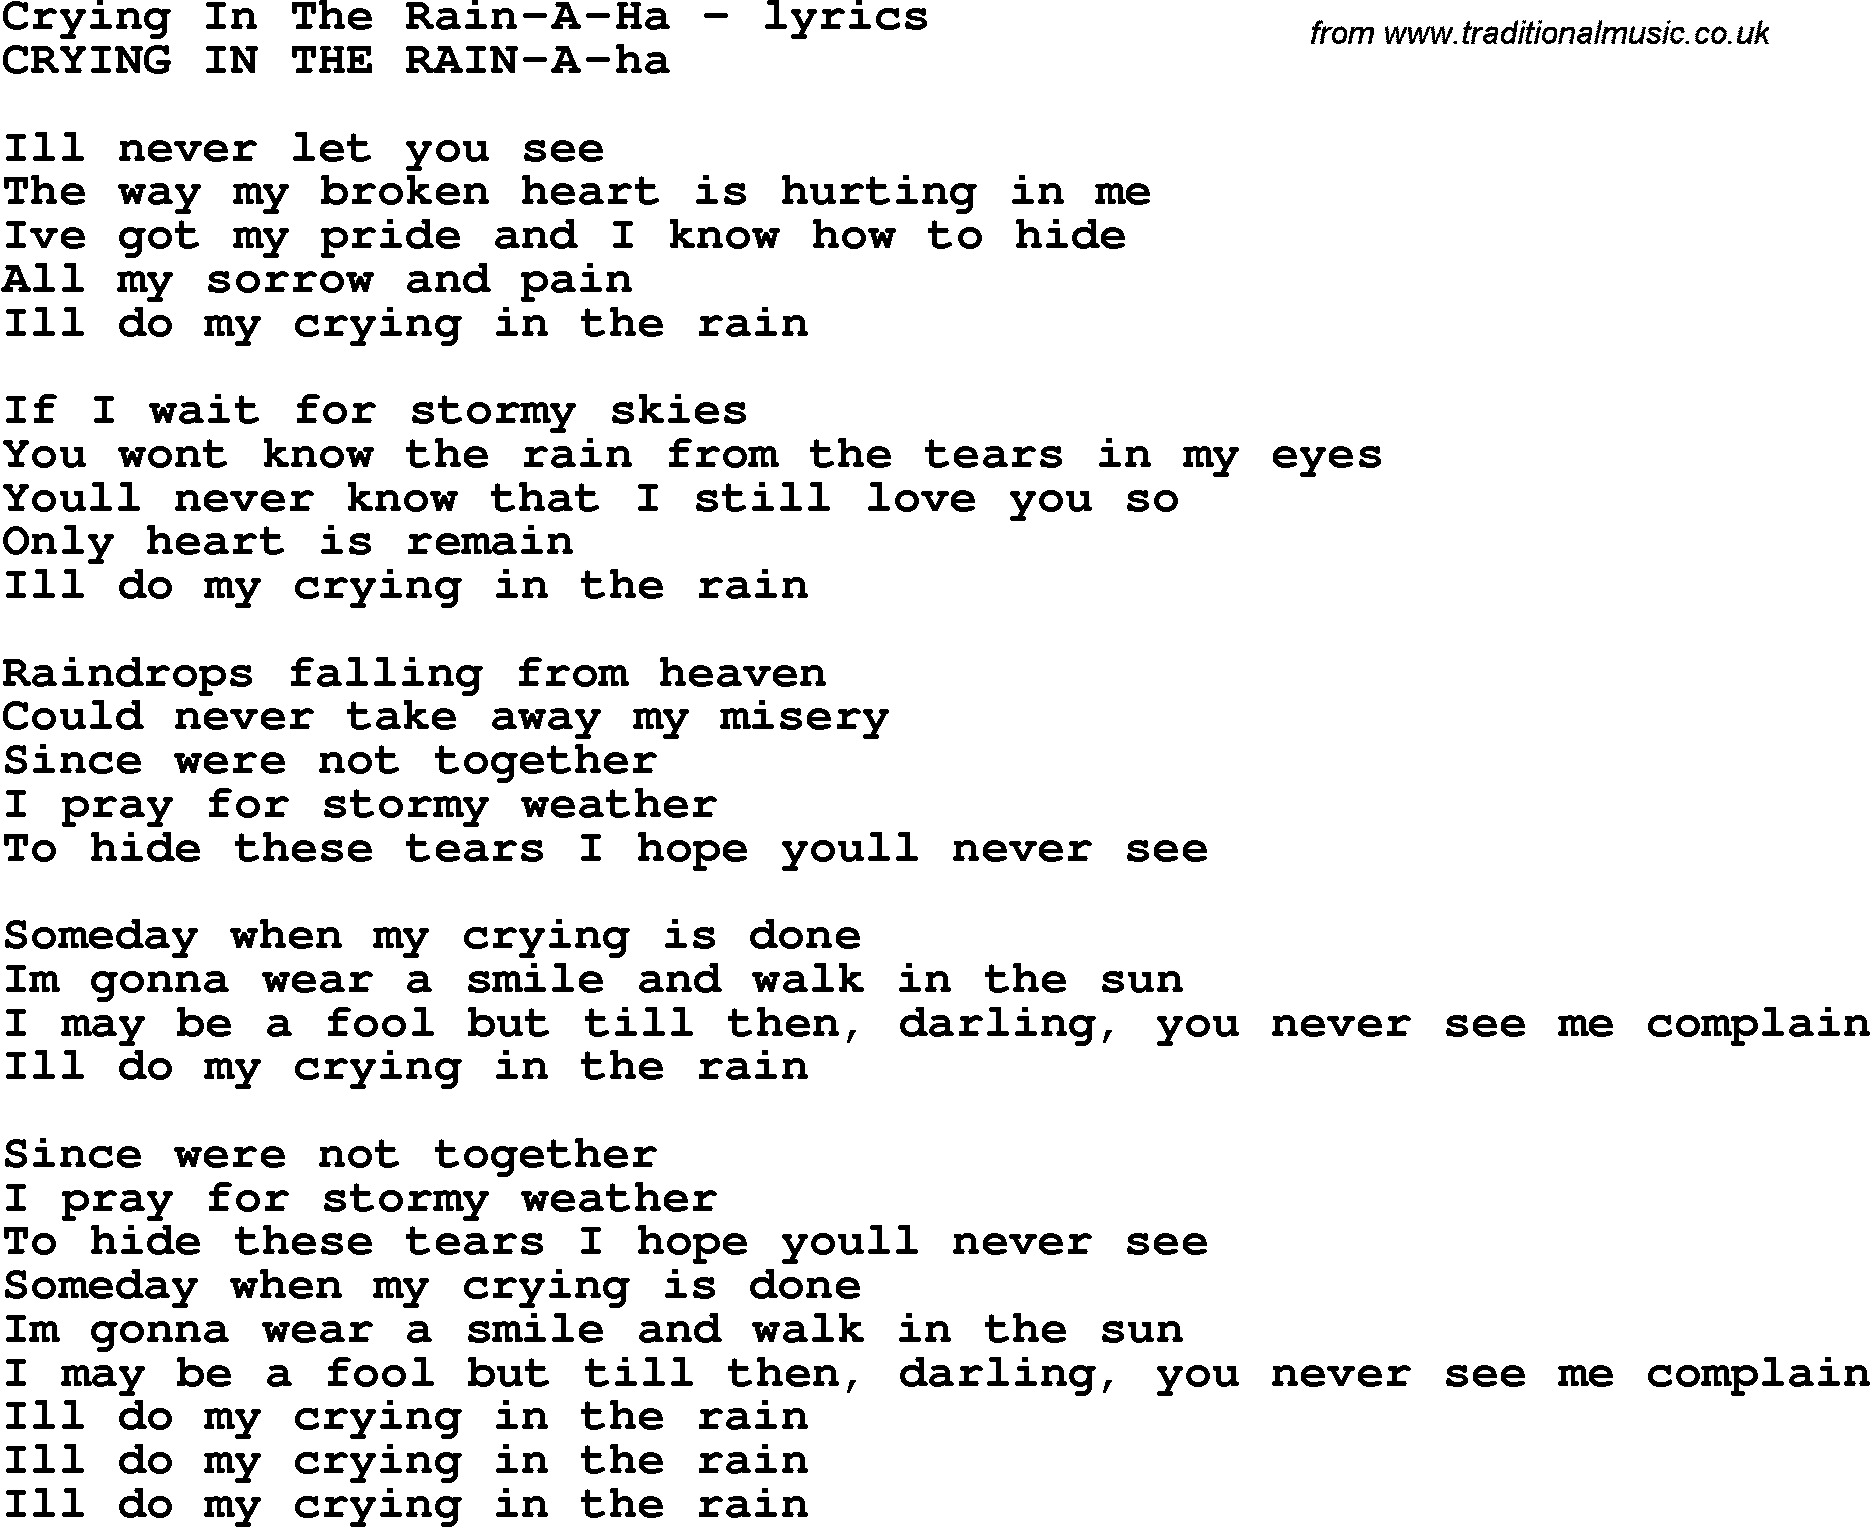 Love Song Lyrics for: Crying In The Rain-A-Ha